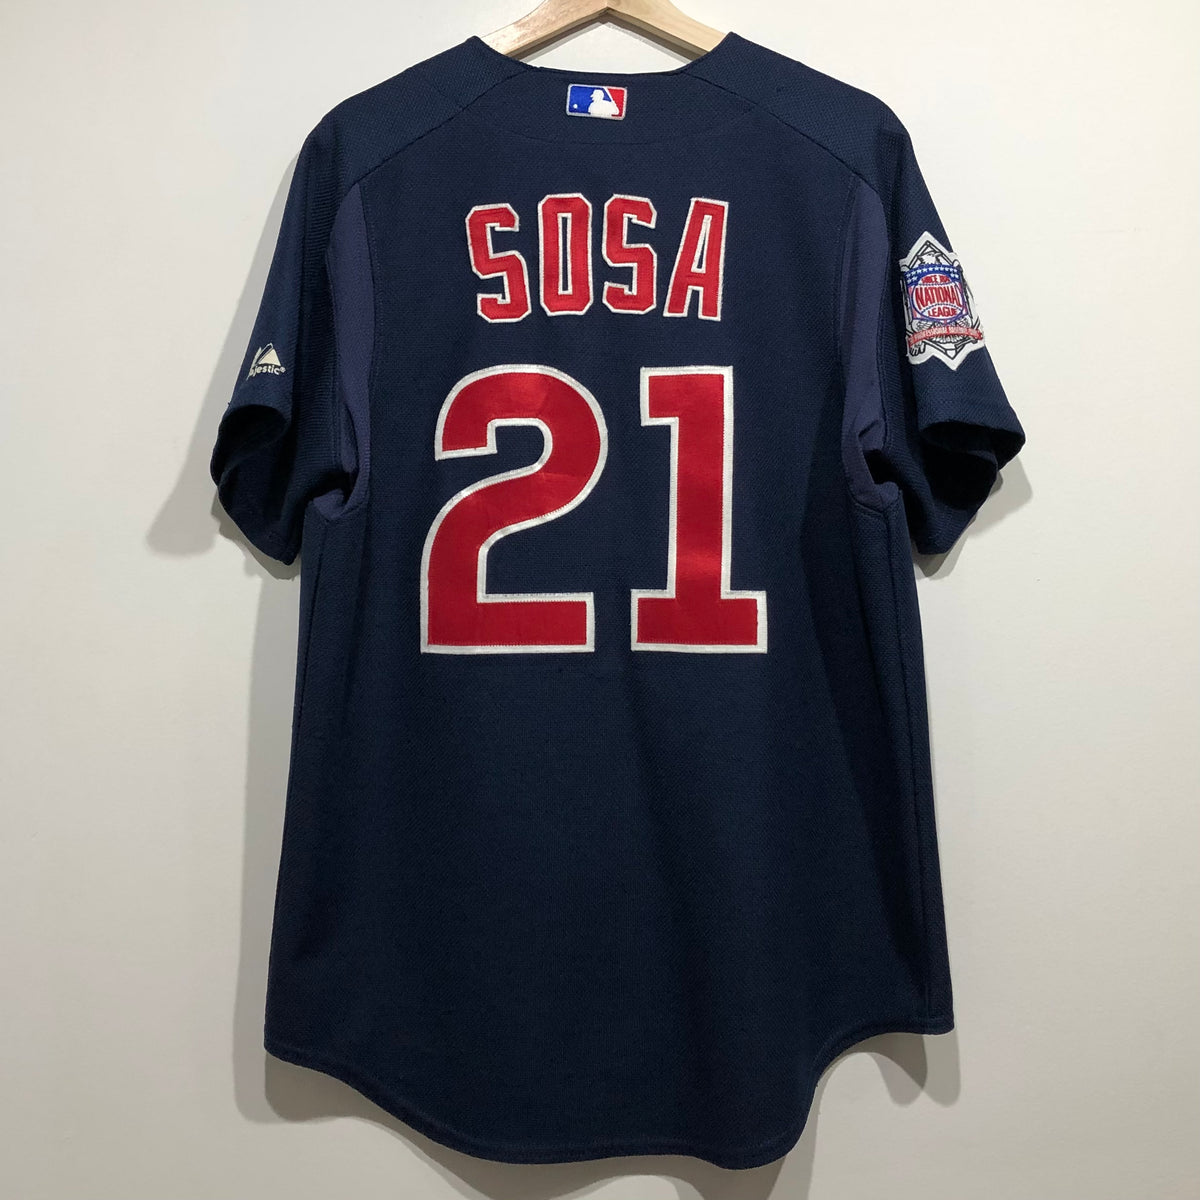 Rare Vintage Majestic 2002 MLB All Star Game Chicago Cubs Sammy Sosa Jersey